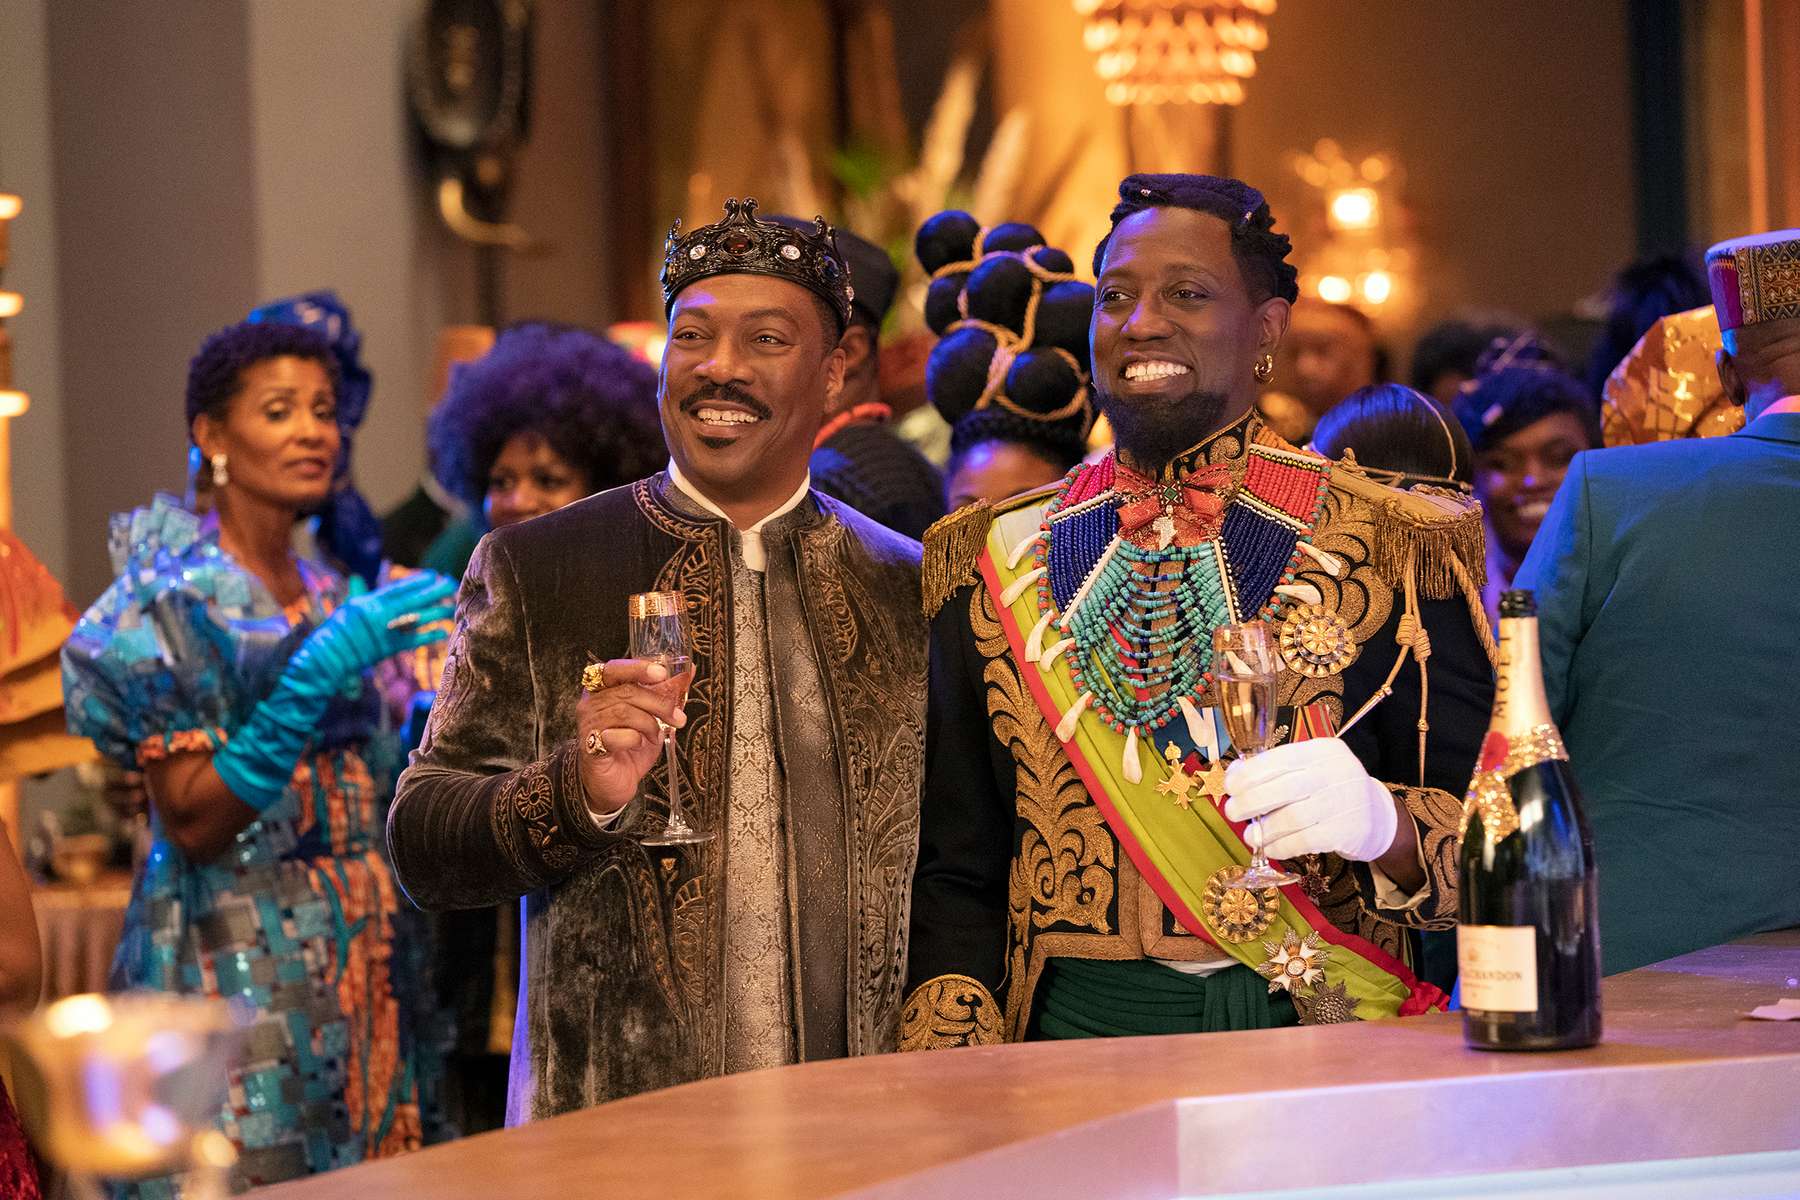 Eddie Murphy and Wesley Snipes star in COMING 2 AMERICA Photo: Quantrell D. Colbert© 2020 Paramount Pictures